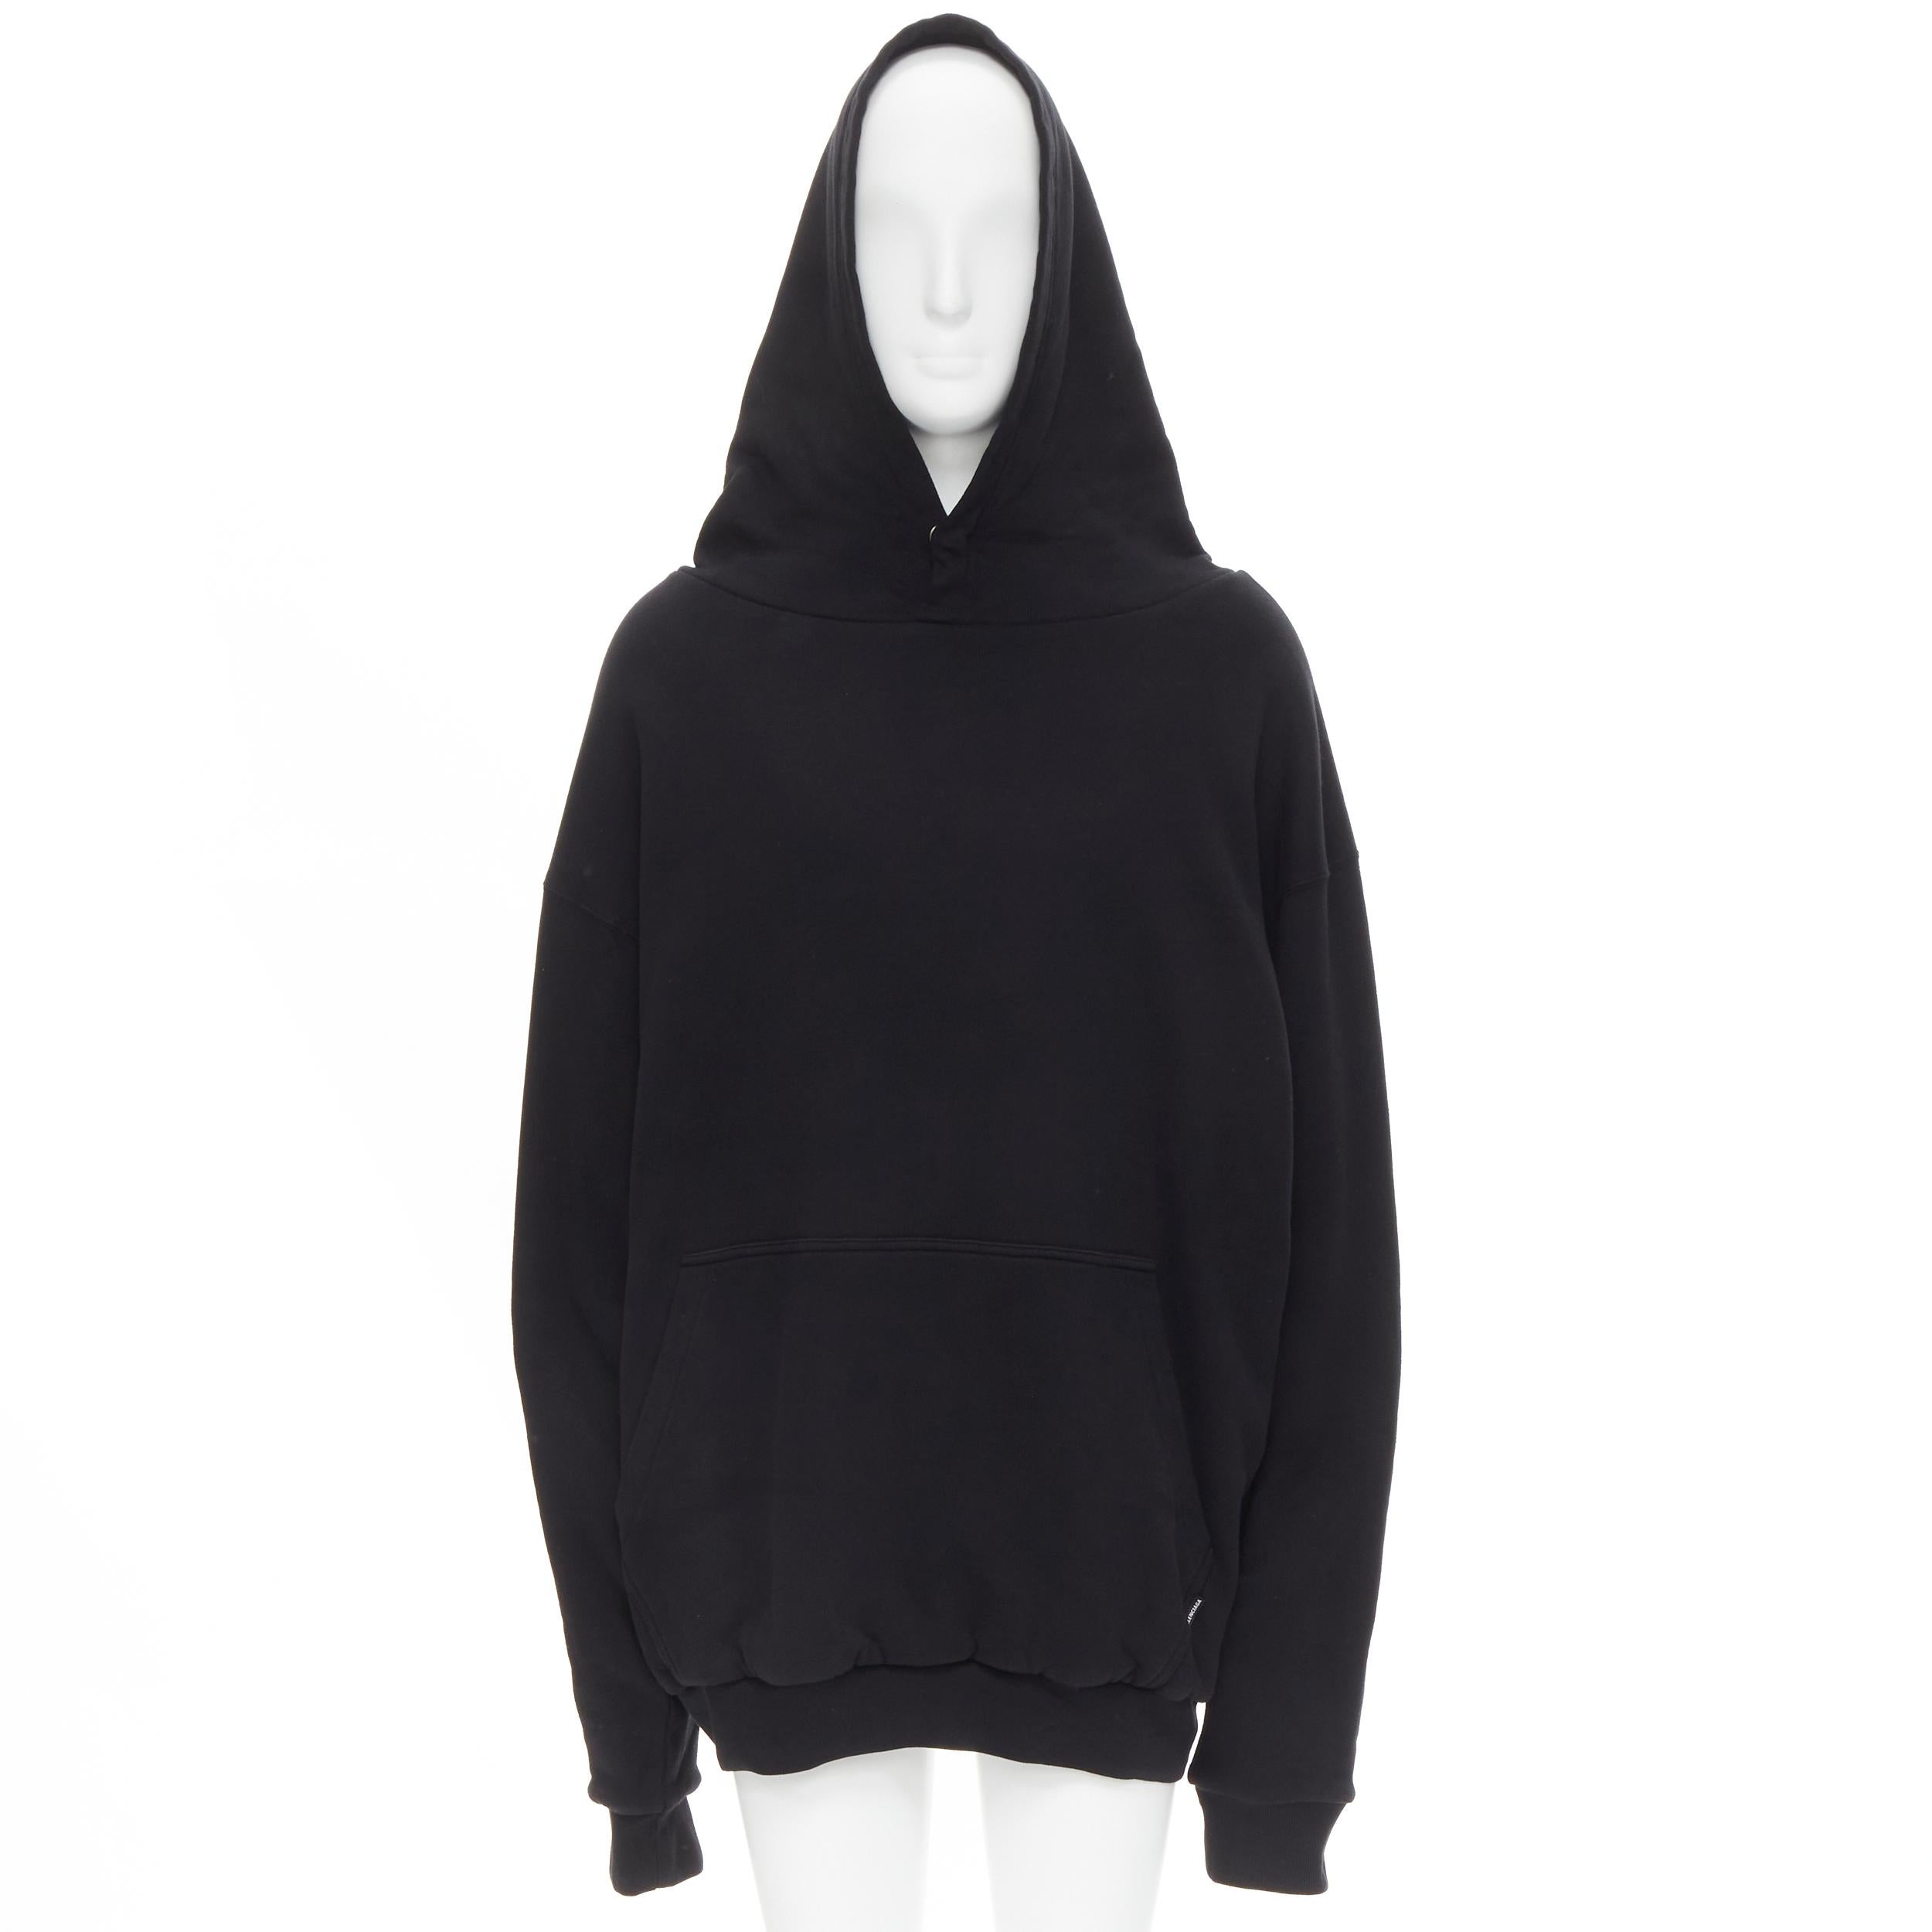 new BALENCIAGA Demna 2018 black I Love Techno embroidered cotton hoodie L 
Reference: TGAS/C00478 
Brand: Balenciaga 
Designer: Demna 
Collection: 2018 
Material: Cotton 
Color: Black 
Pattern: Solid 
Closure: Snap 
Extra Detail: Black heavy cotton